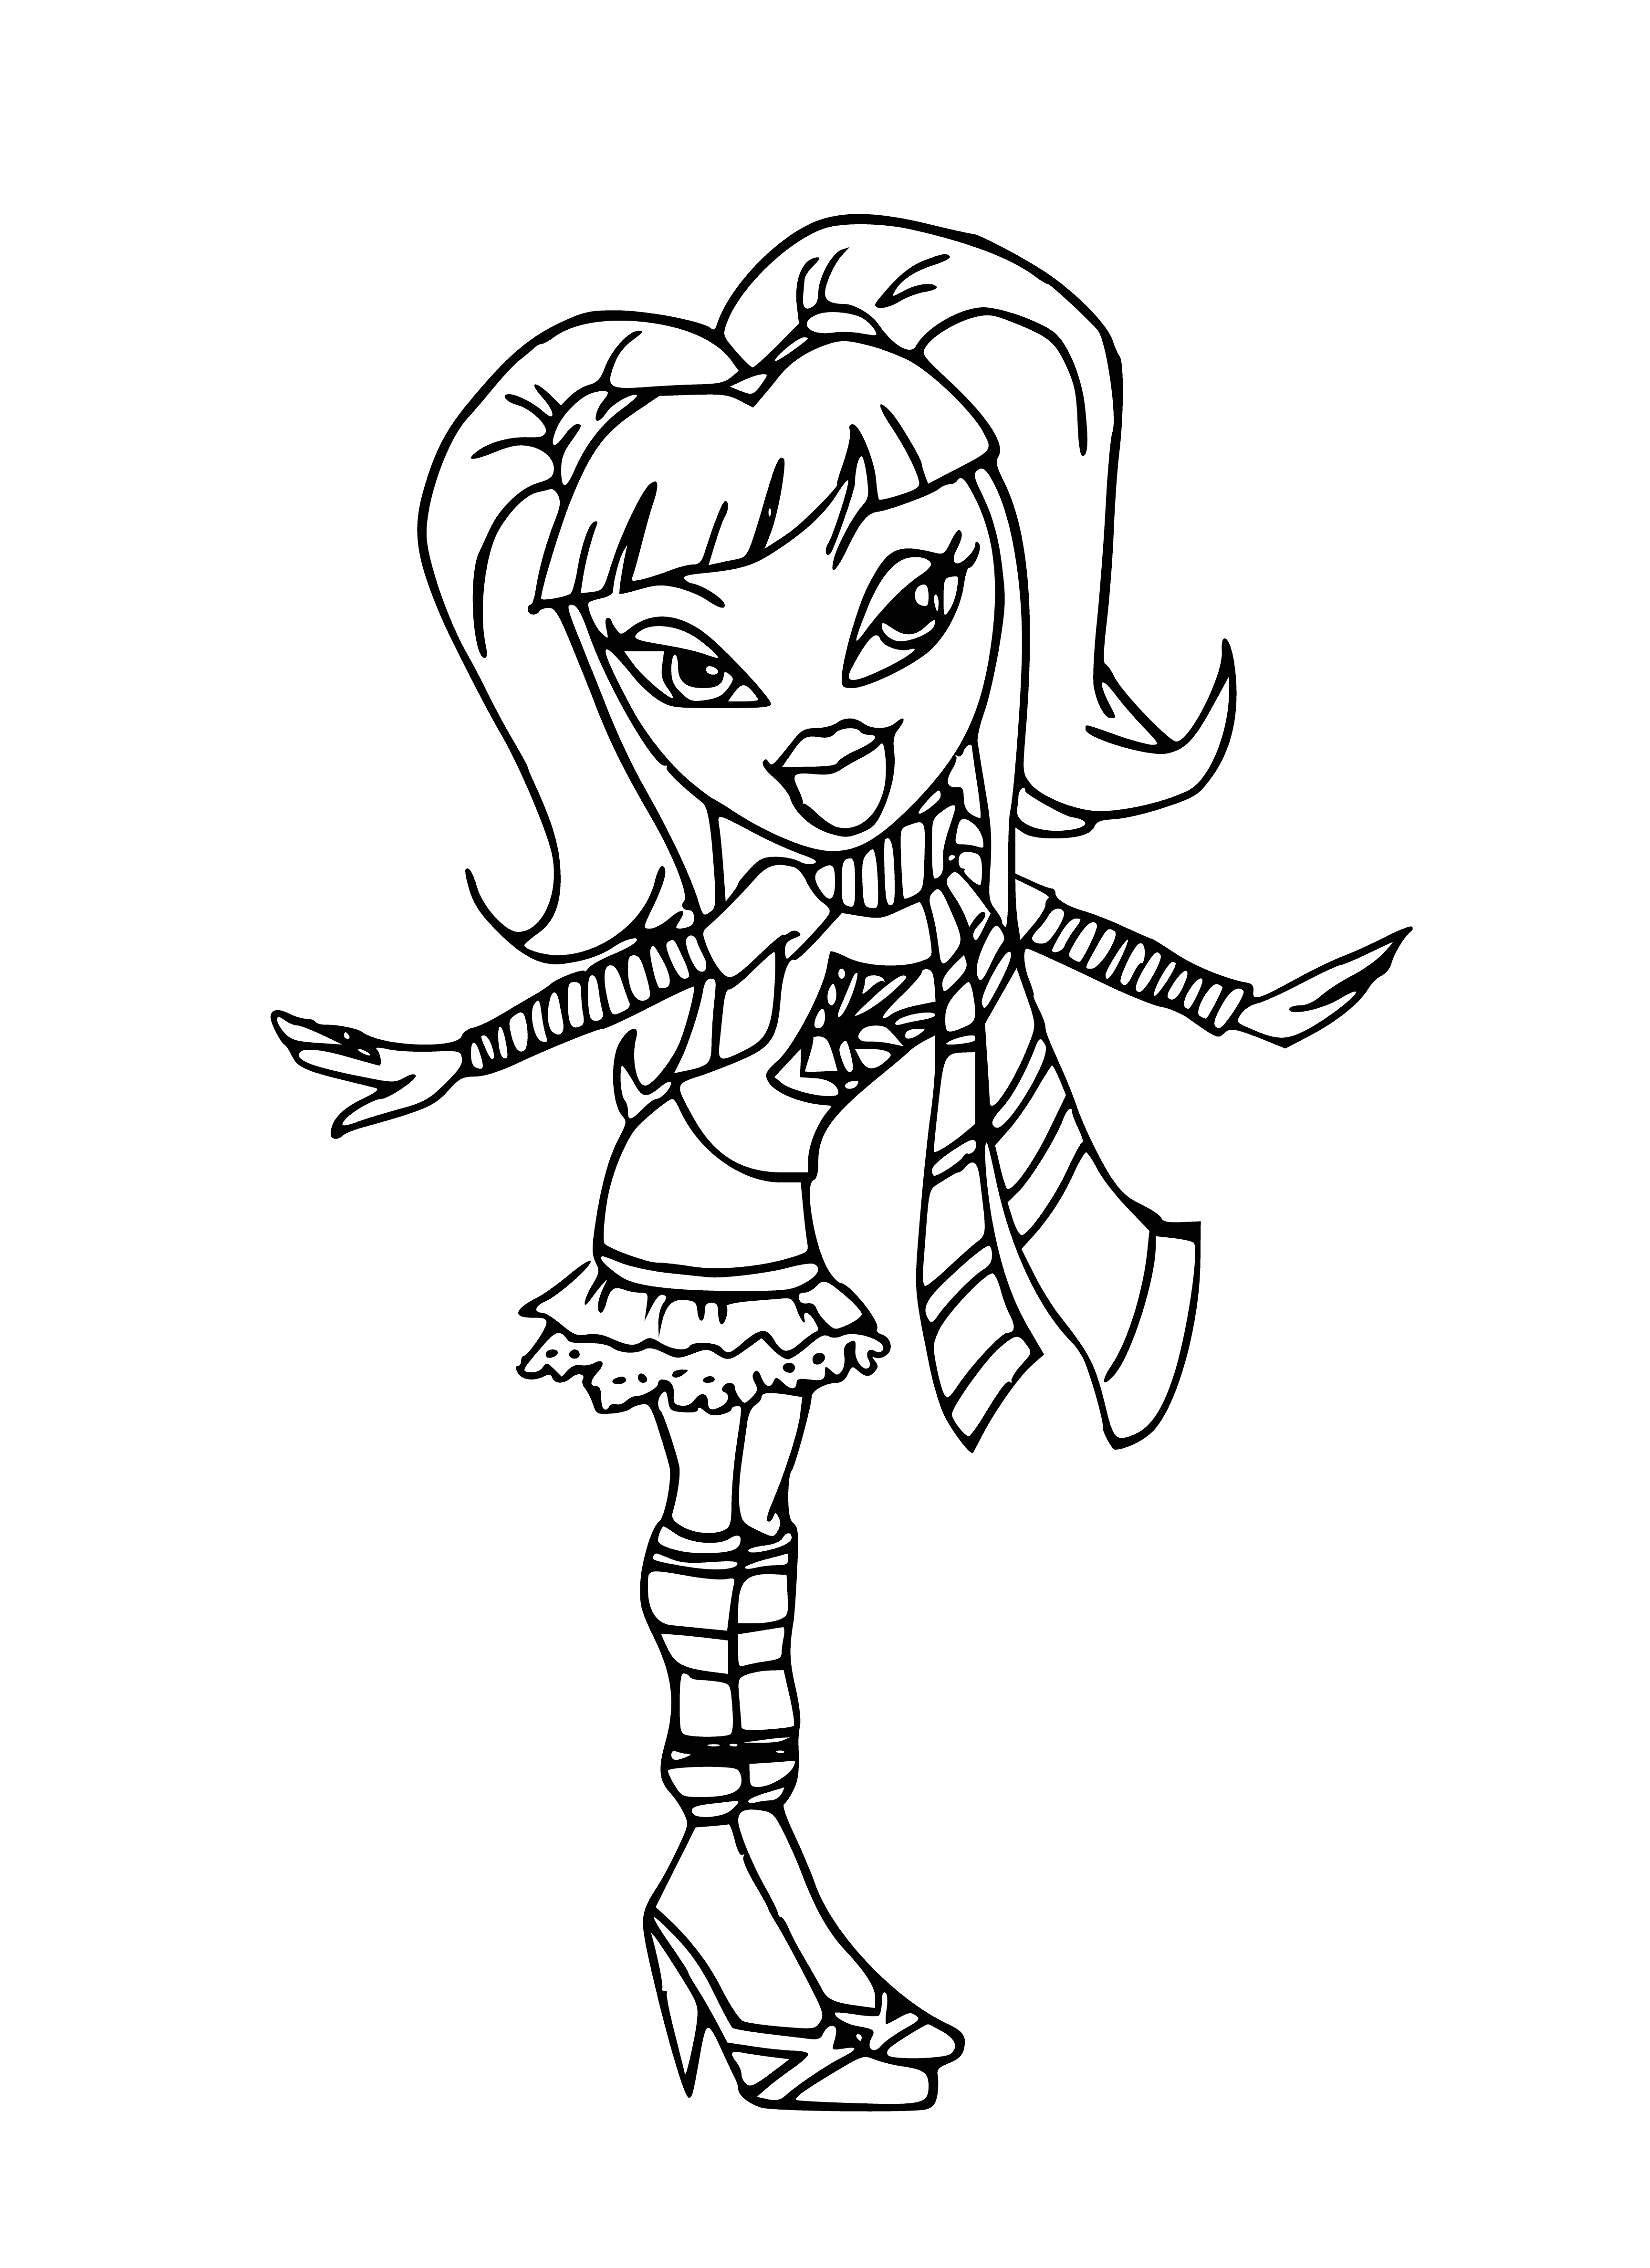 coloring page: Four fashion dolls that love to have fun and wear trendy clothes - that's the Bratz! #SquadGoals